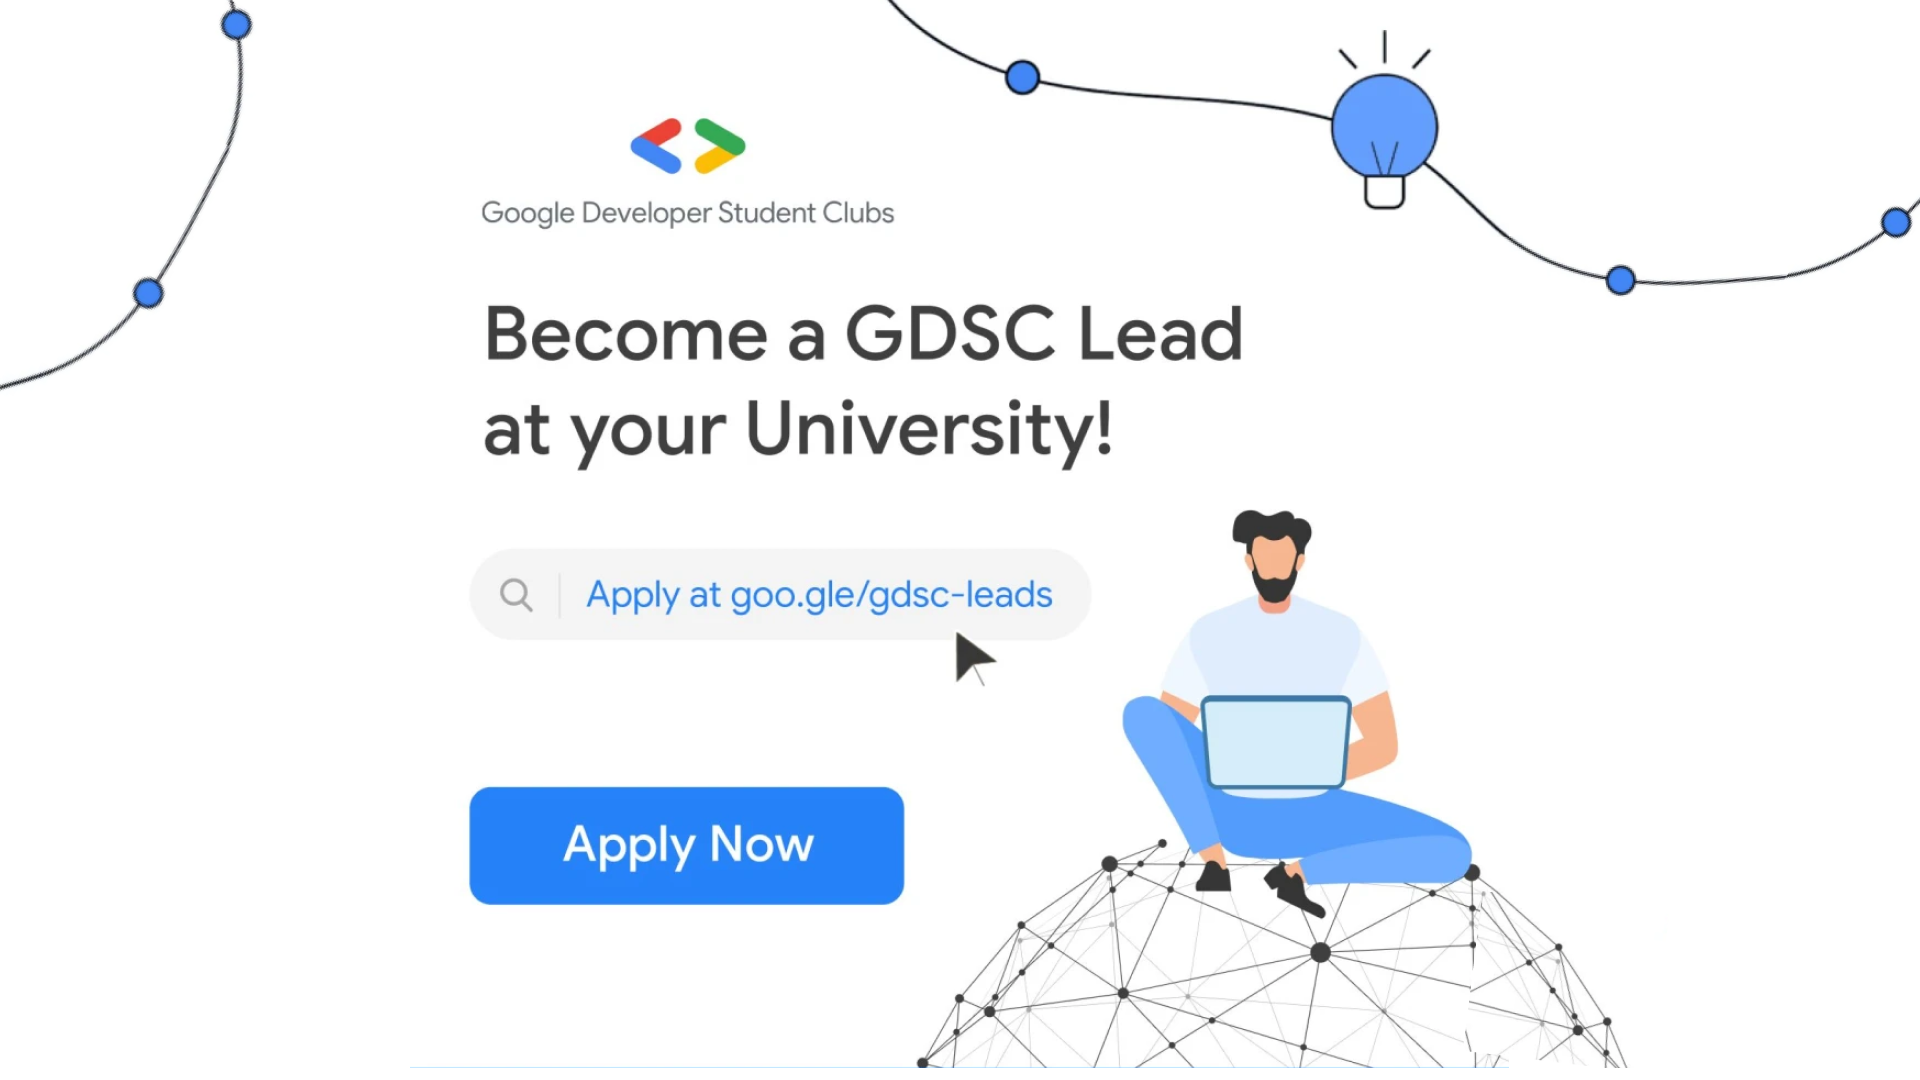 Road to becoming "Google Developer Student Clubs" Lead